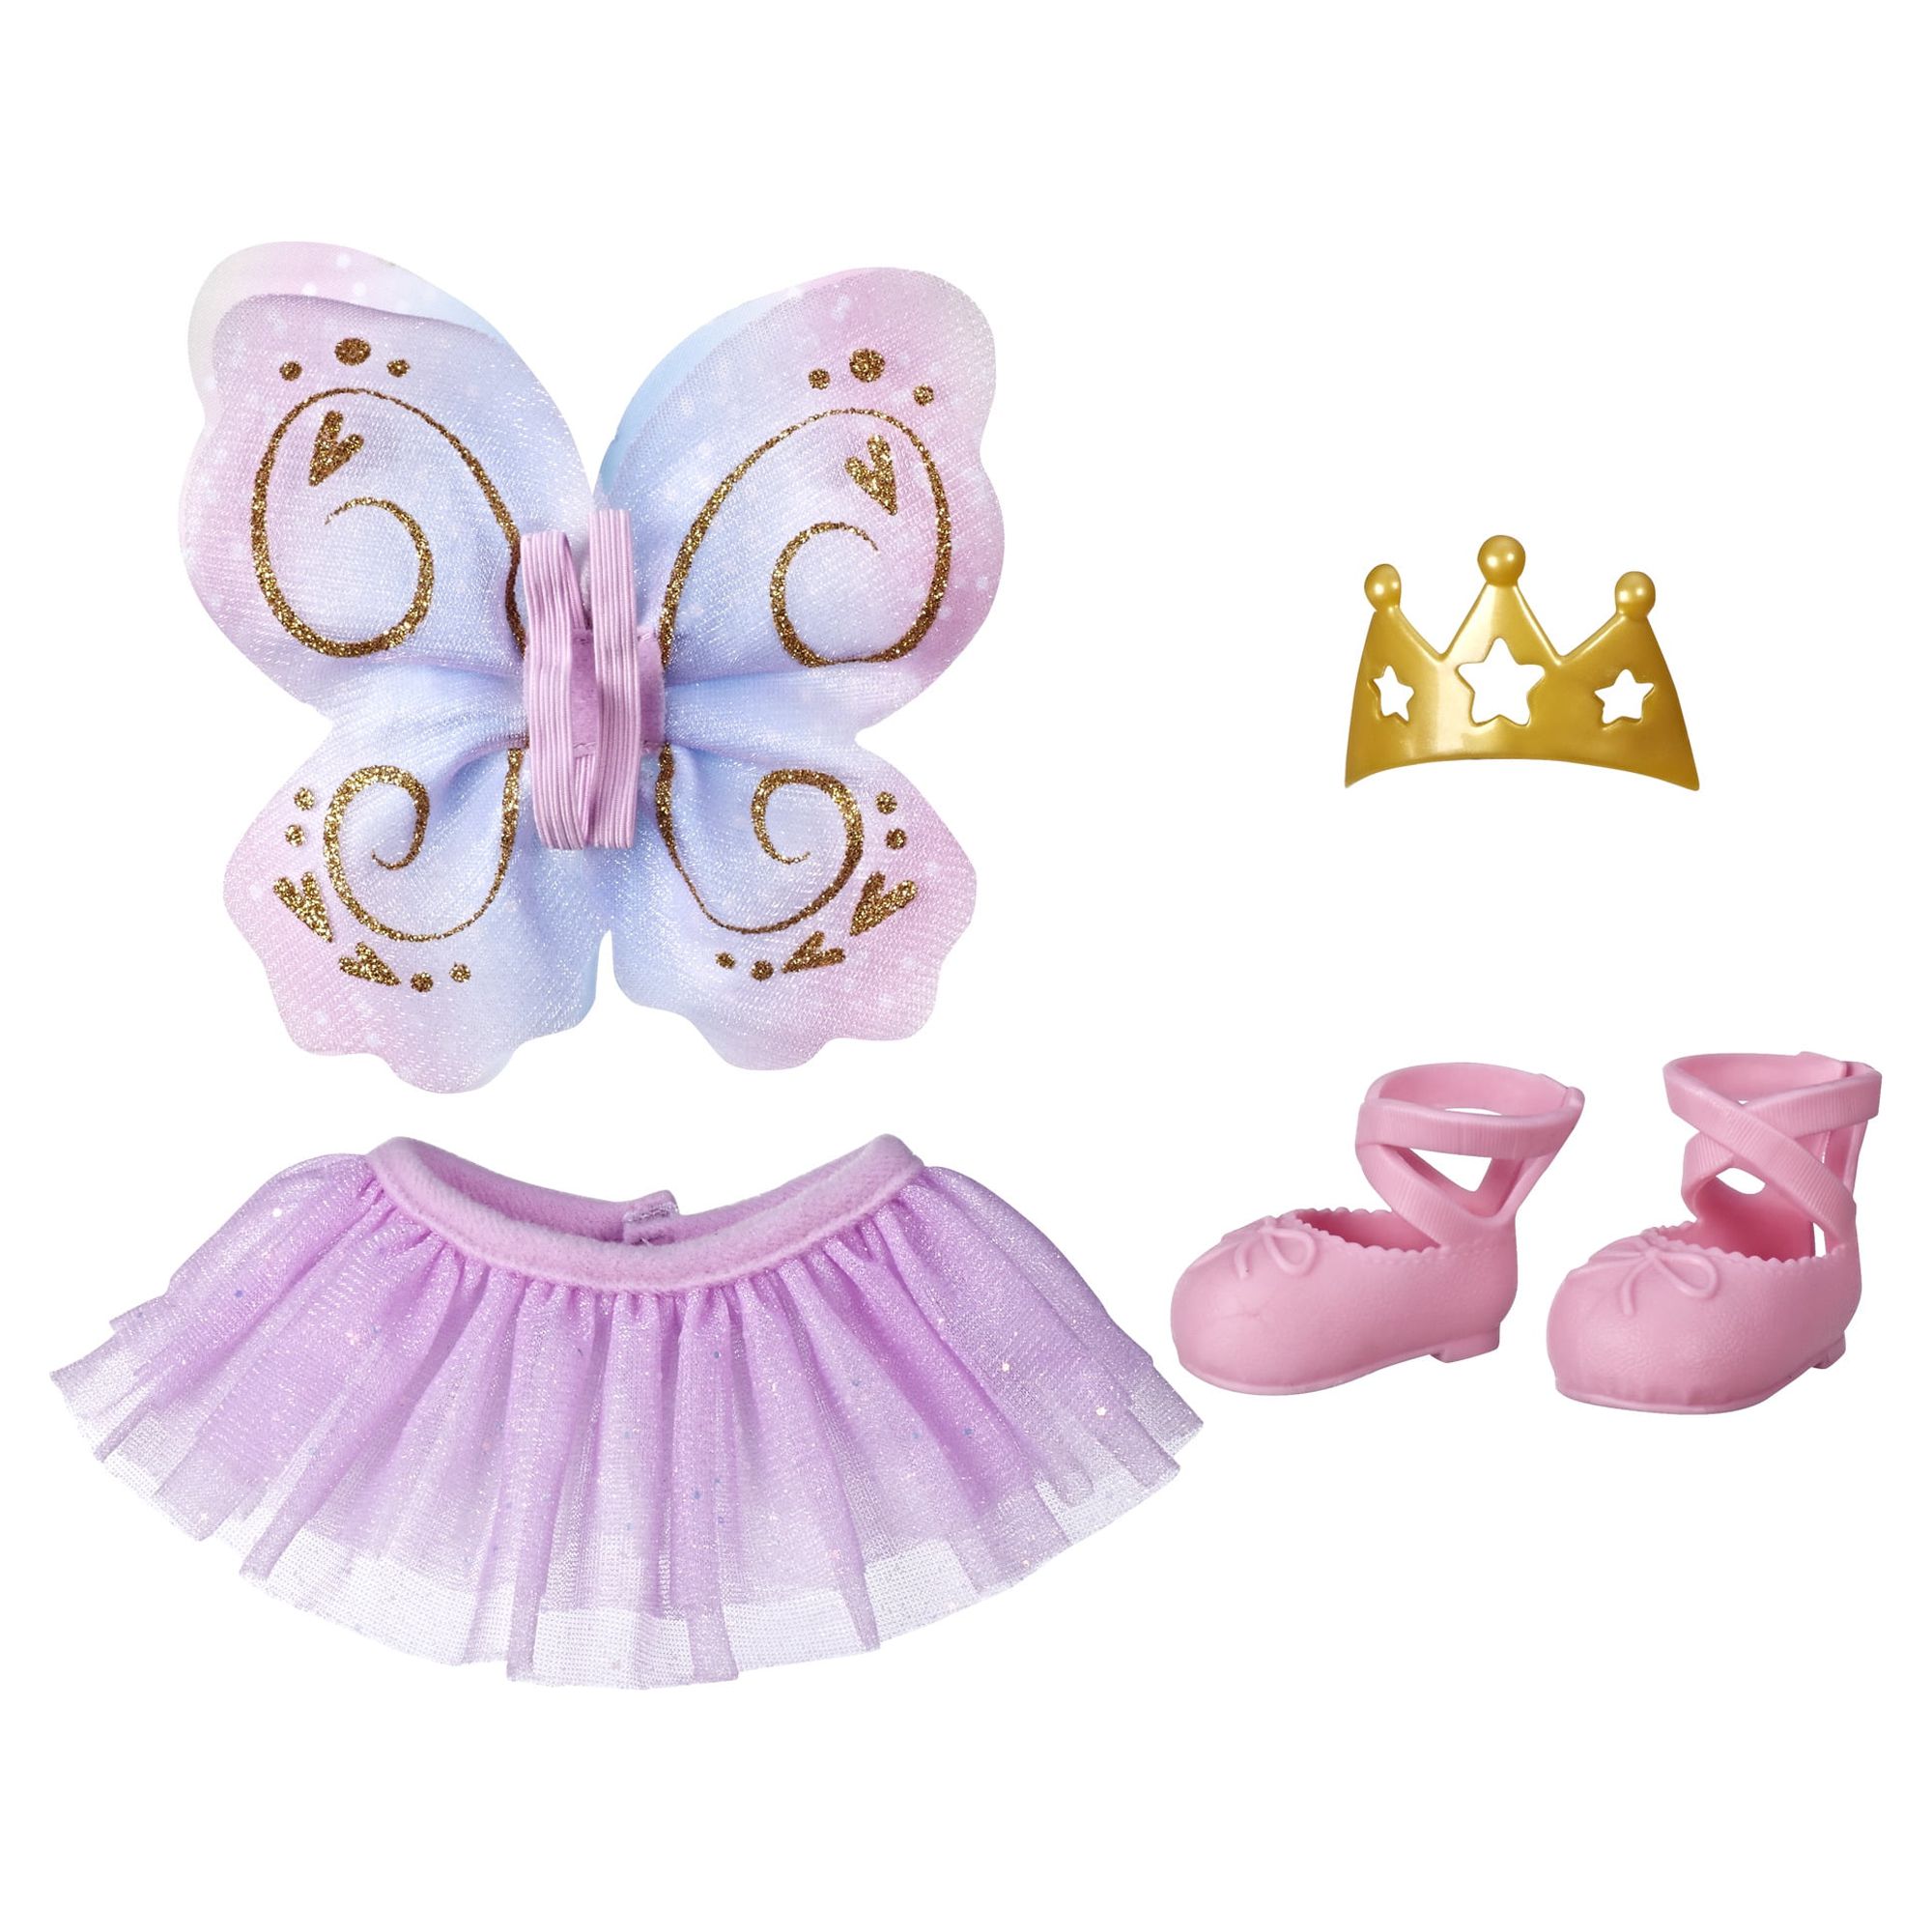 Baby Alive Little Styles, Ballet Outfit for Littles Toddler Dolls - image 1 of 7